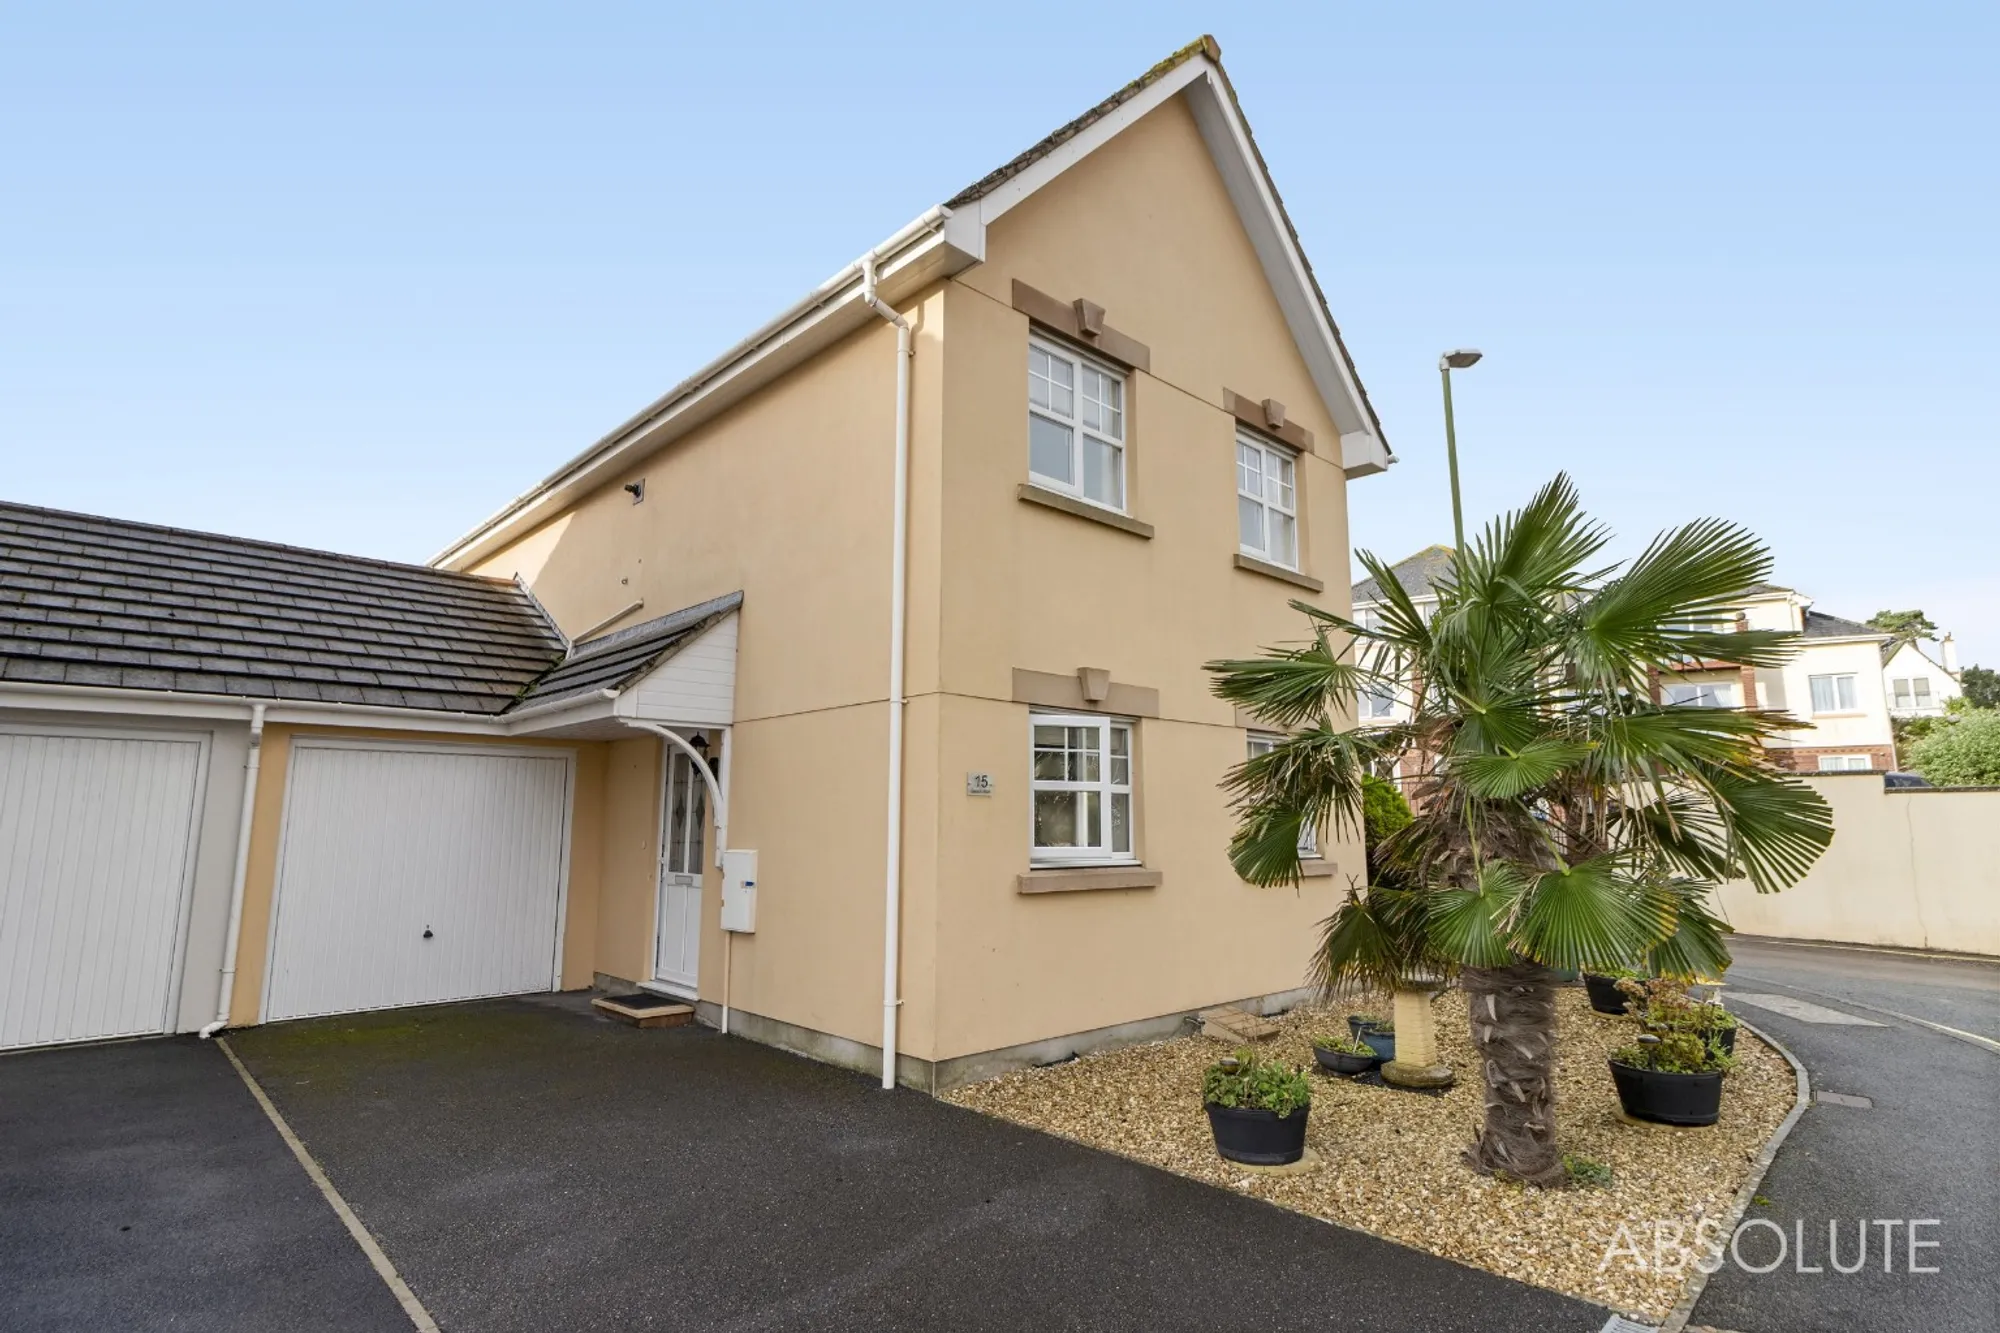 3 bed detached house for sale 1